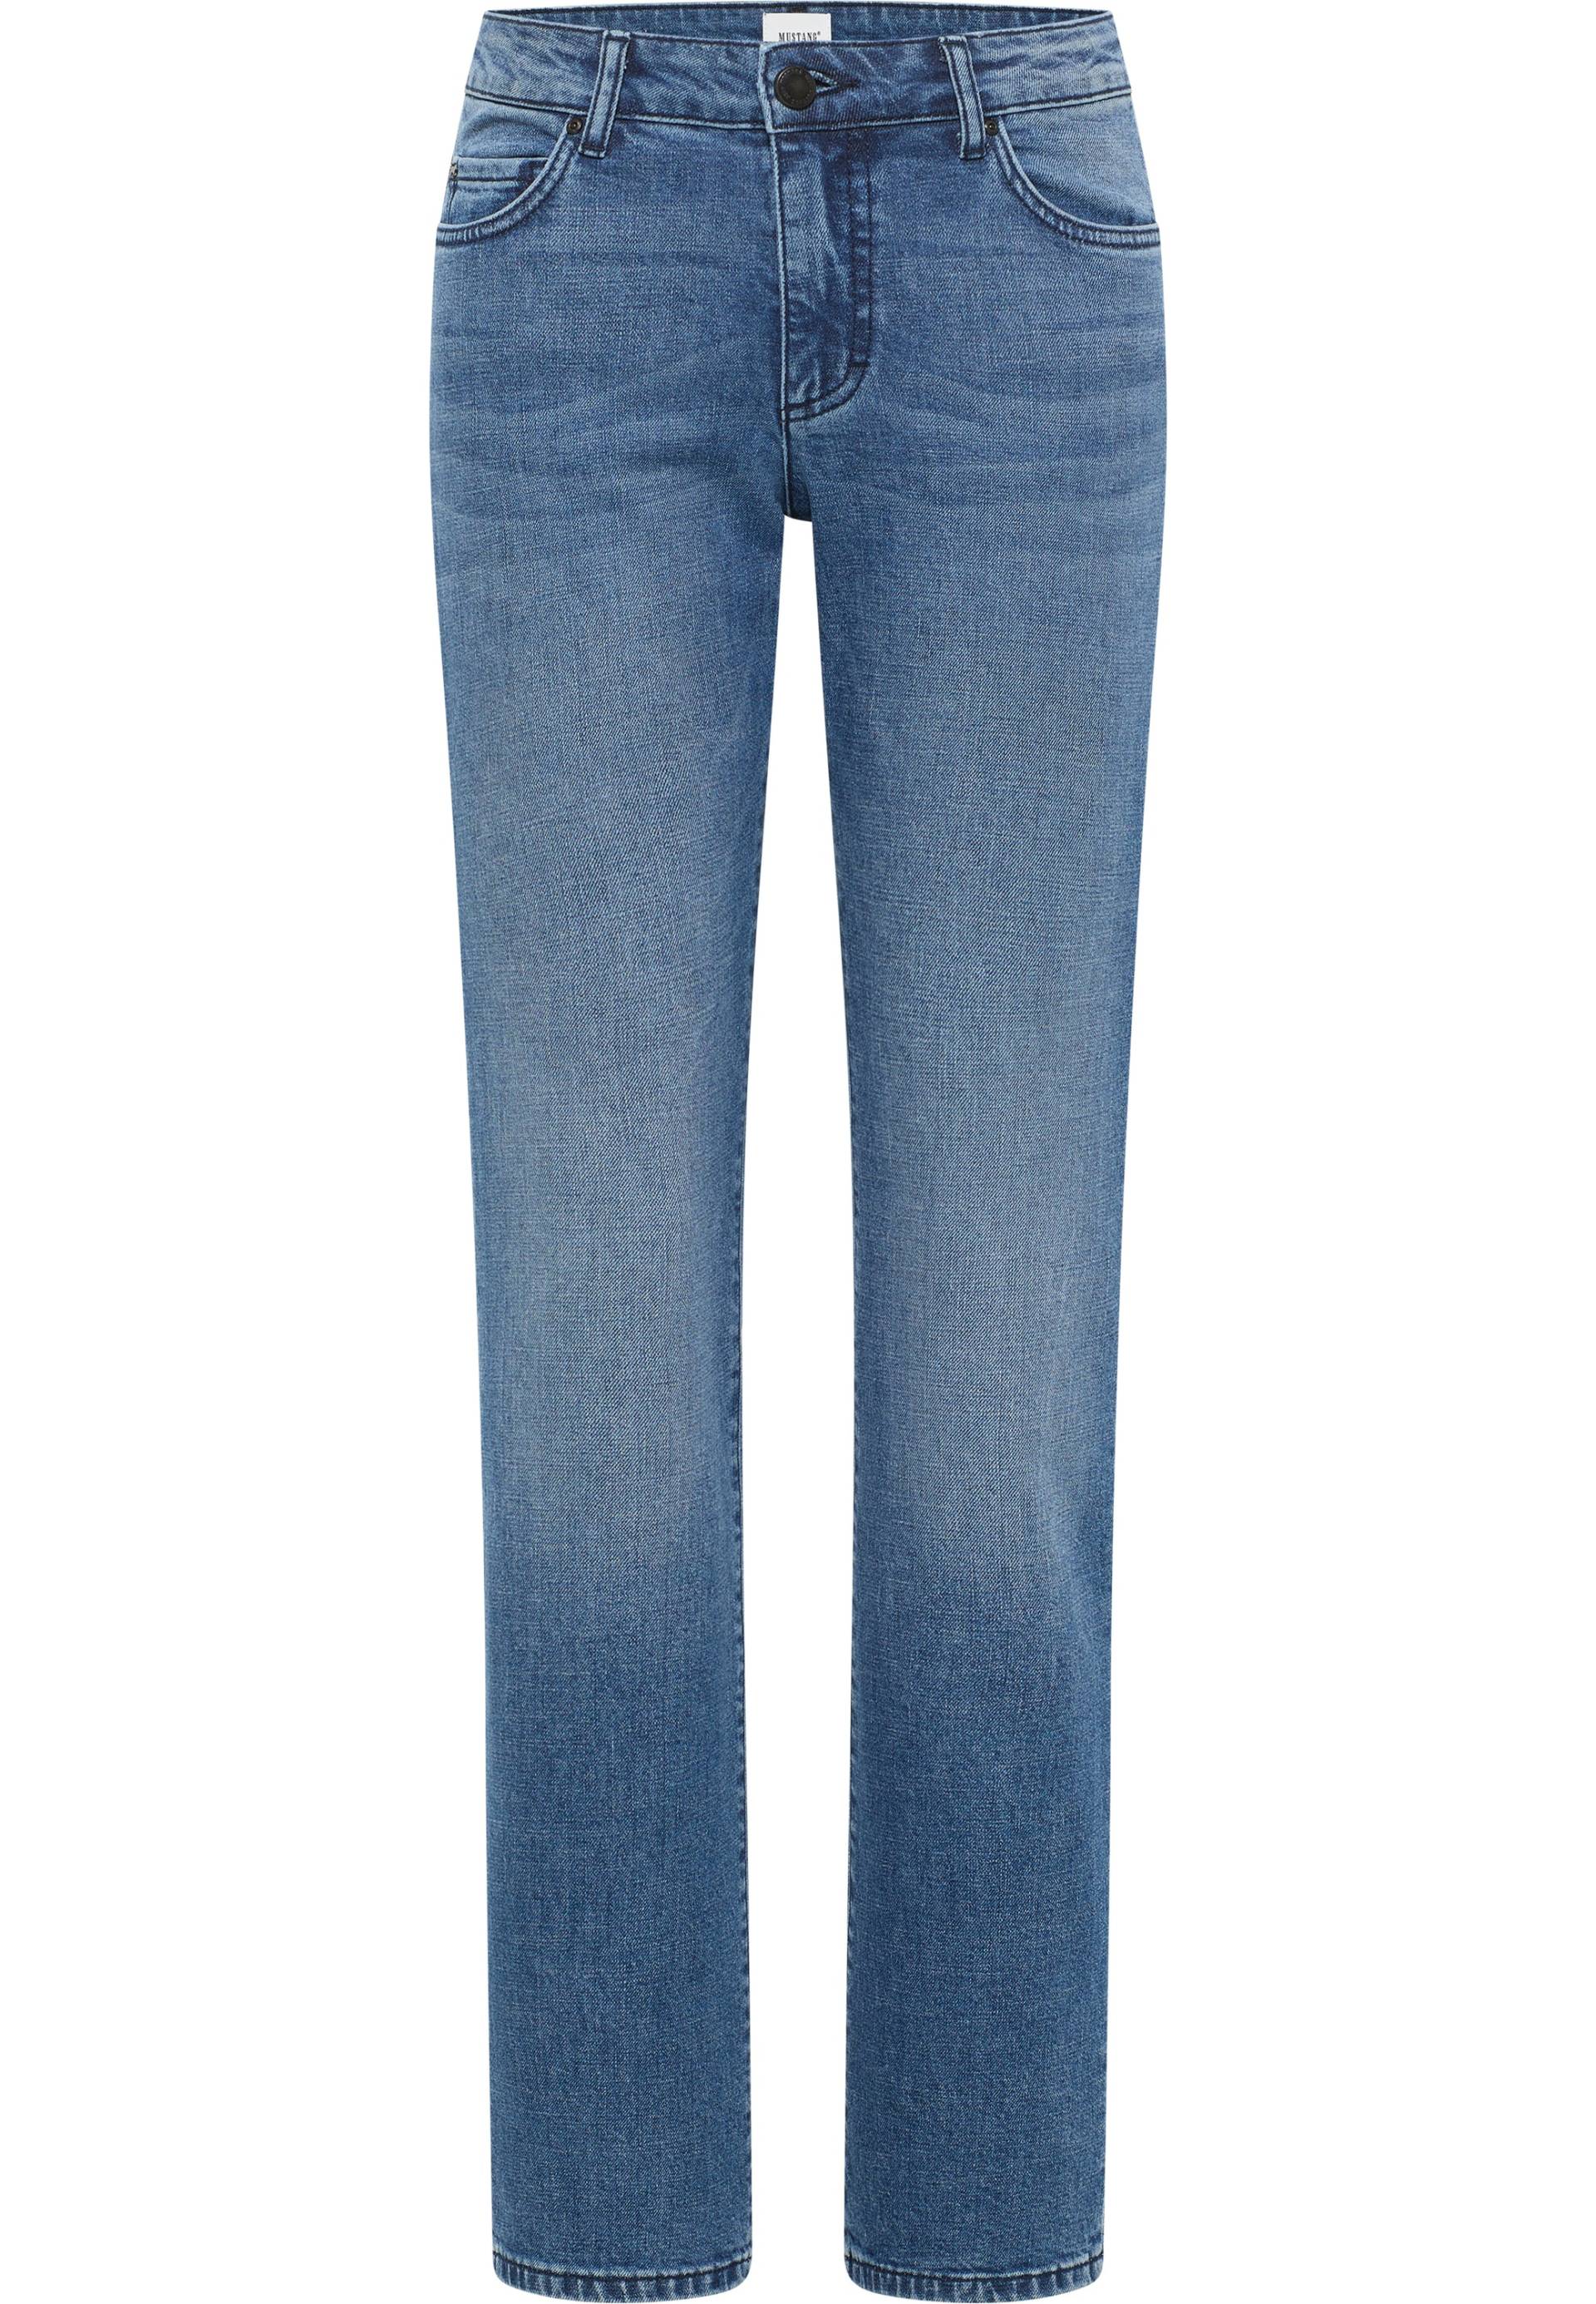 MUSTANG Straight-Jeans »Style Crosby Relaxed Straight« von mustang